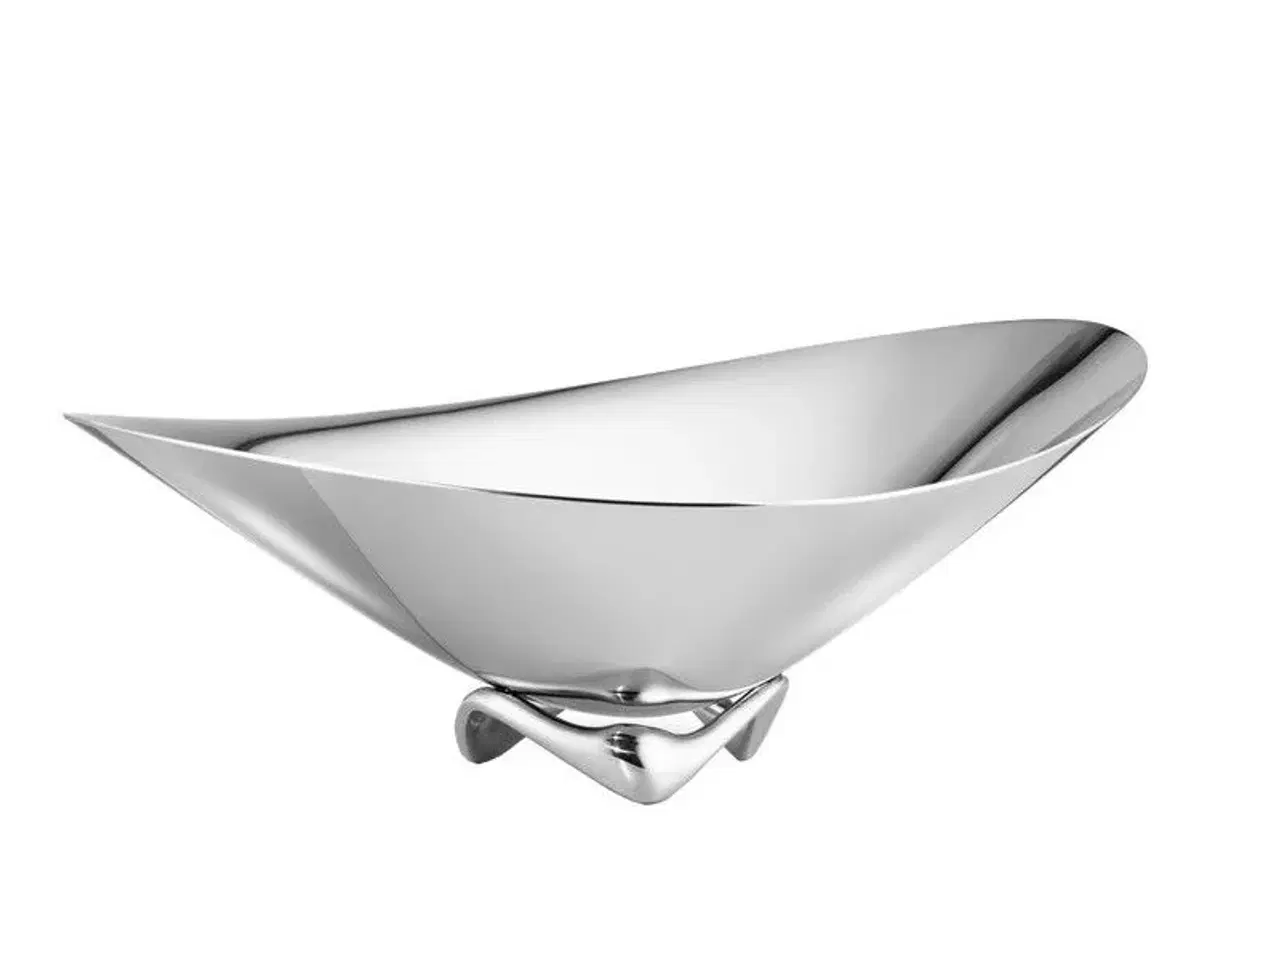 Billede 1 - Georg Jensen icon collection wave bowl x-small